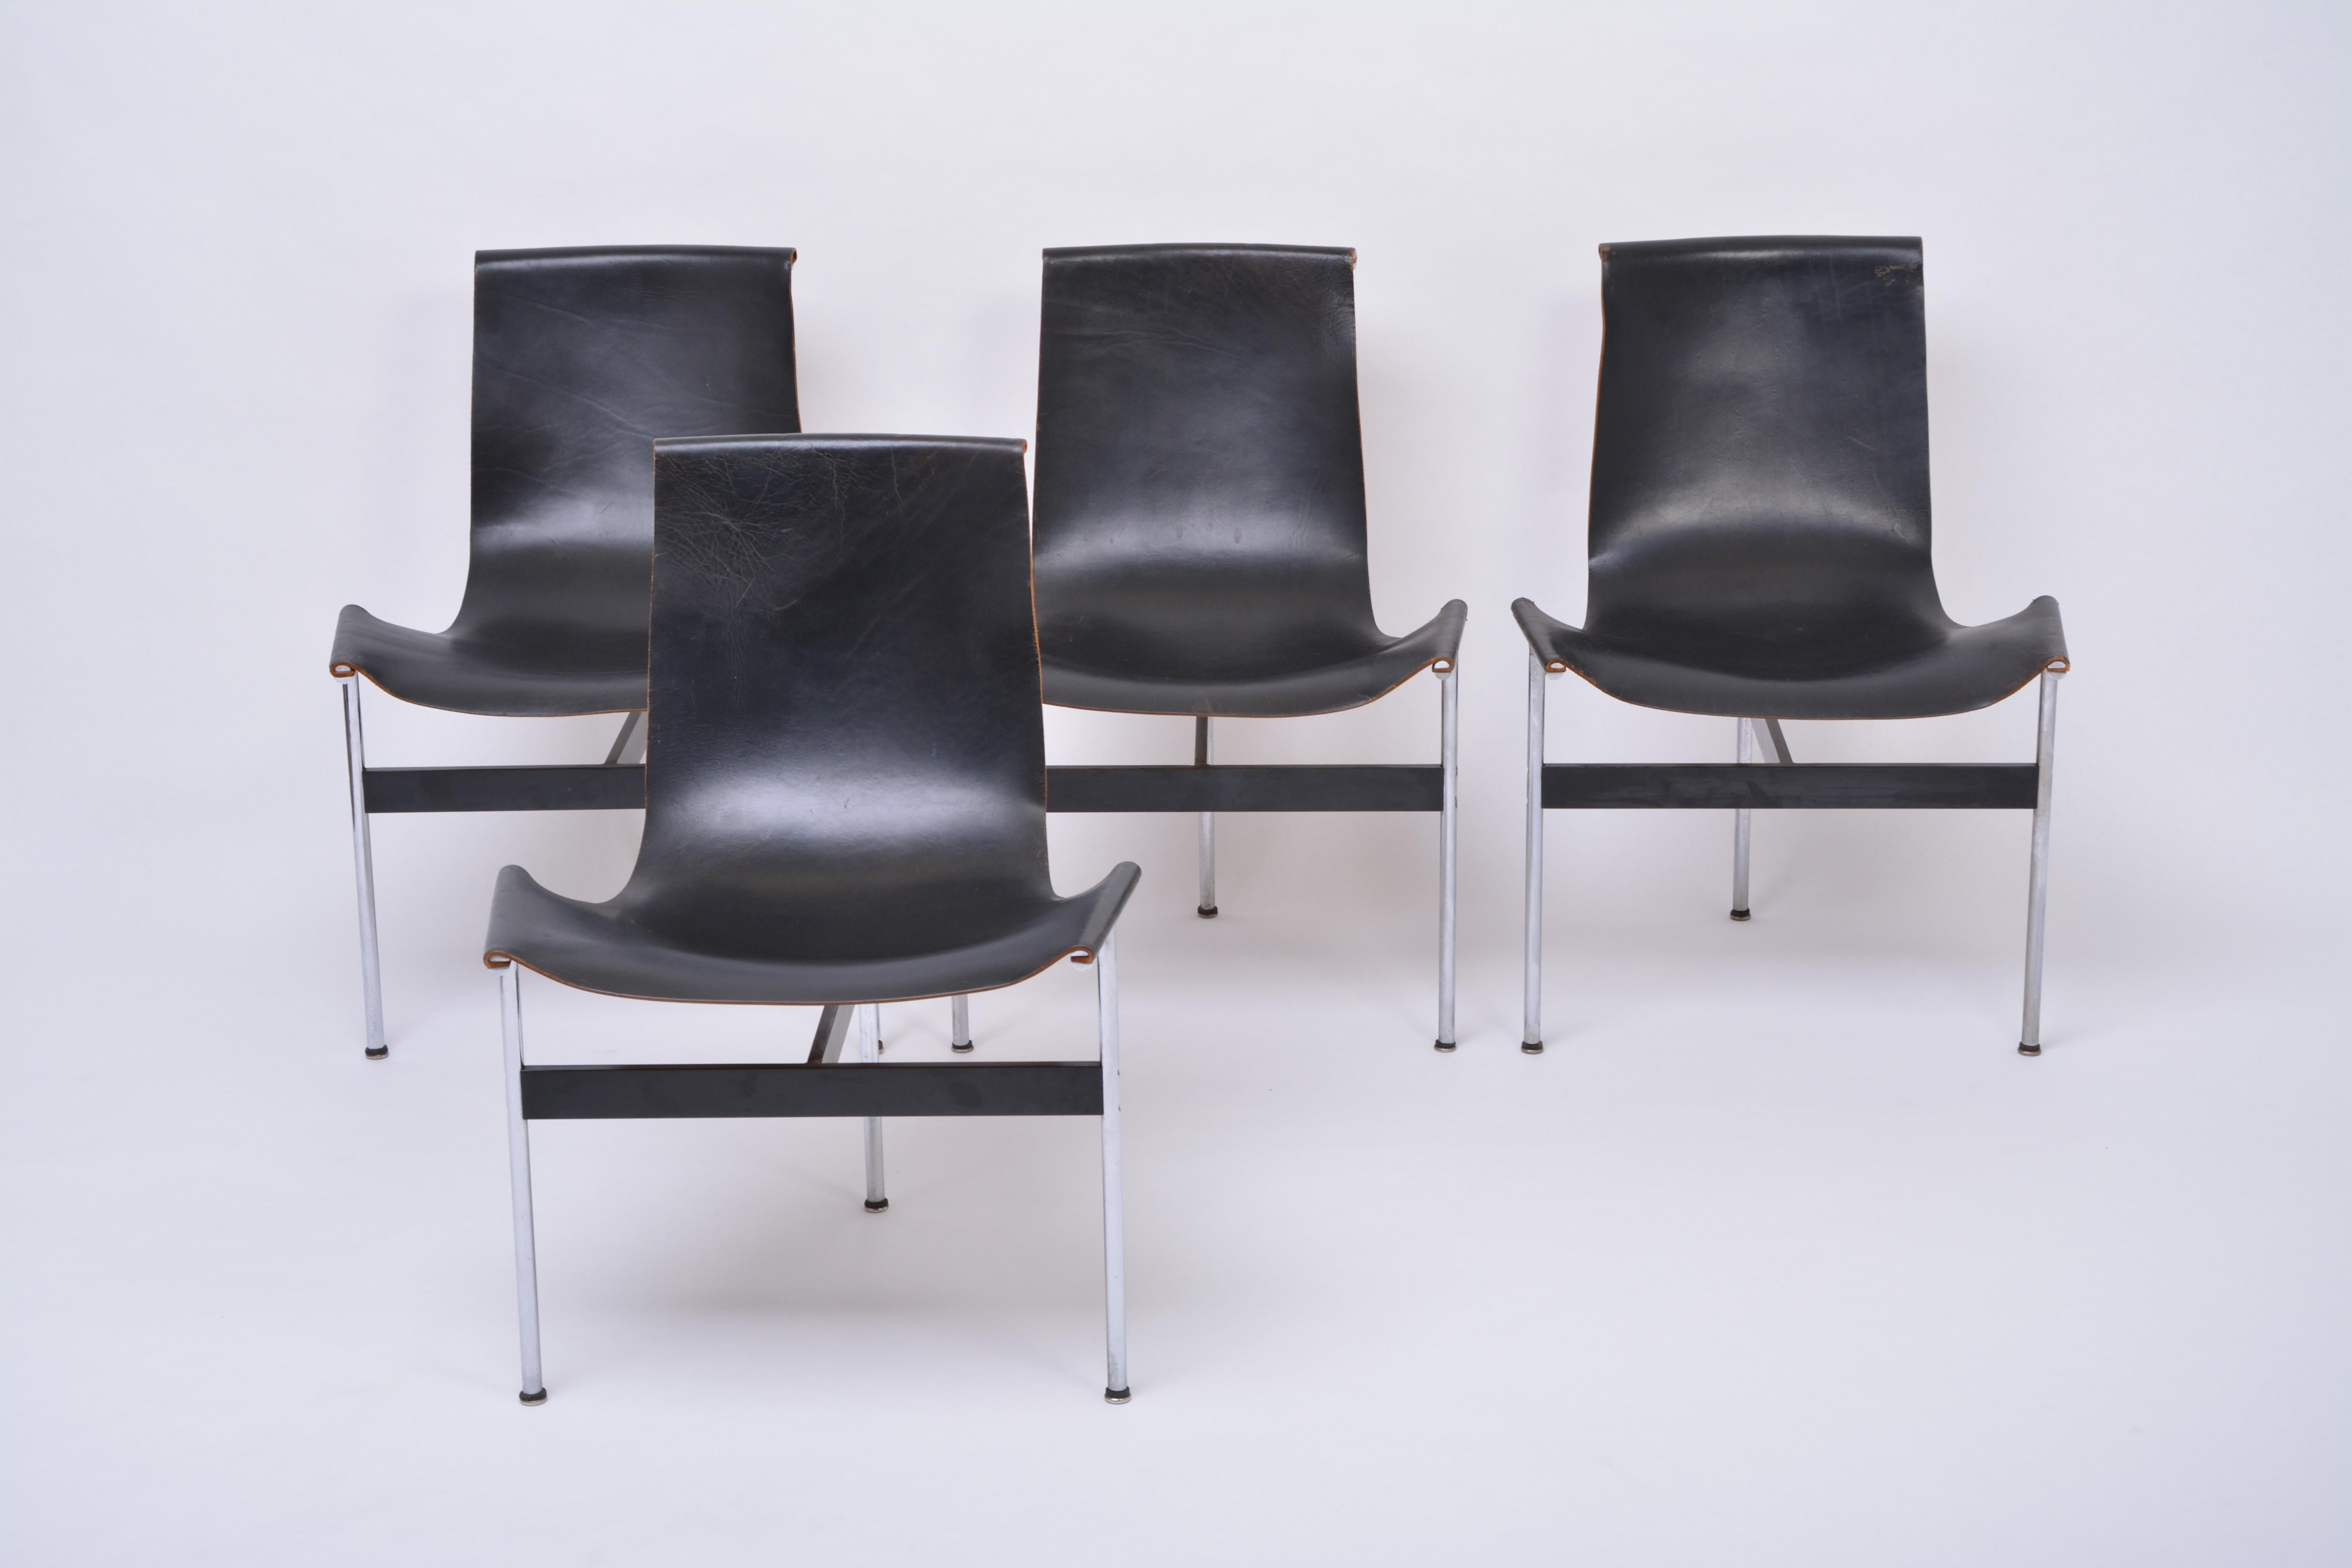 Set of Four Midcentury T-Chairs in black Leather by Katavolos, Littell and Kelly
In 1952 William Katavolos, Douglas Kelley and Ross Littell designed the so called T-chair for Laverne in 1952. The steel frame holds the leather by means of three